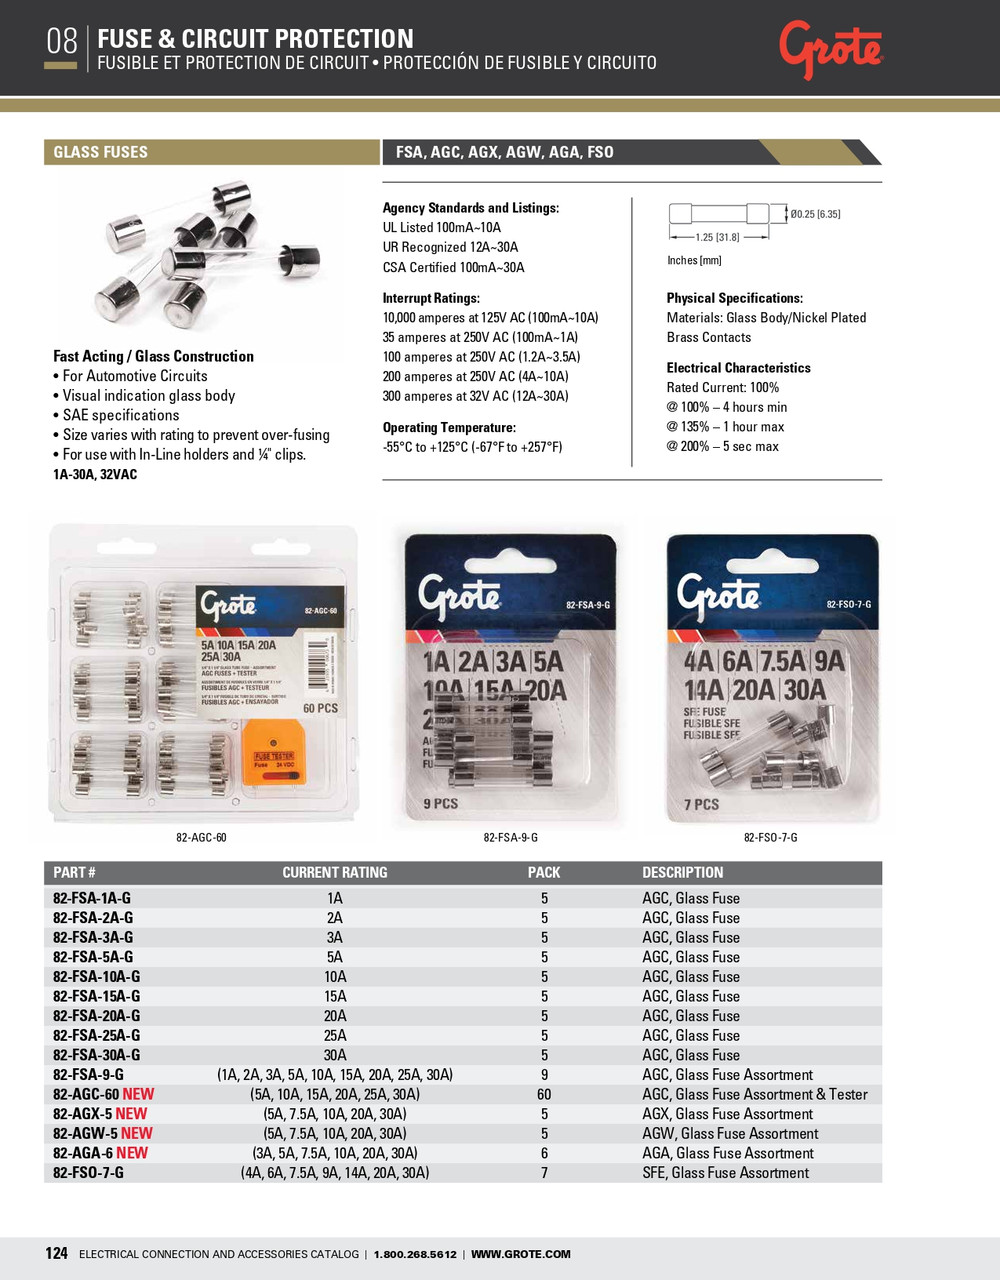 AGX Glass Fuse Assortment @ 5 Pack  82-AGX-5